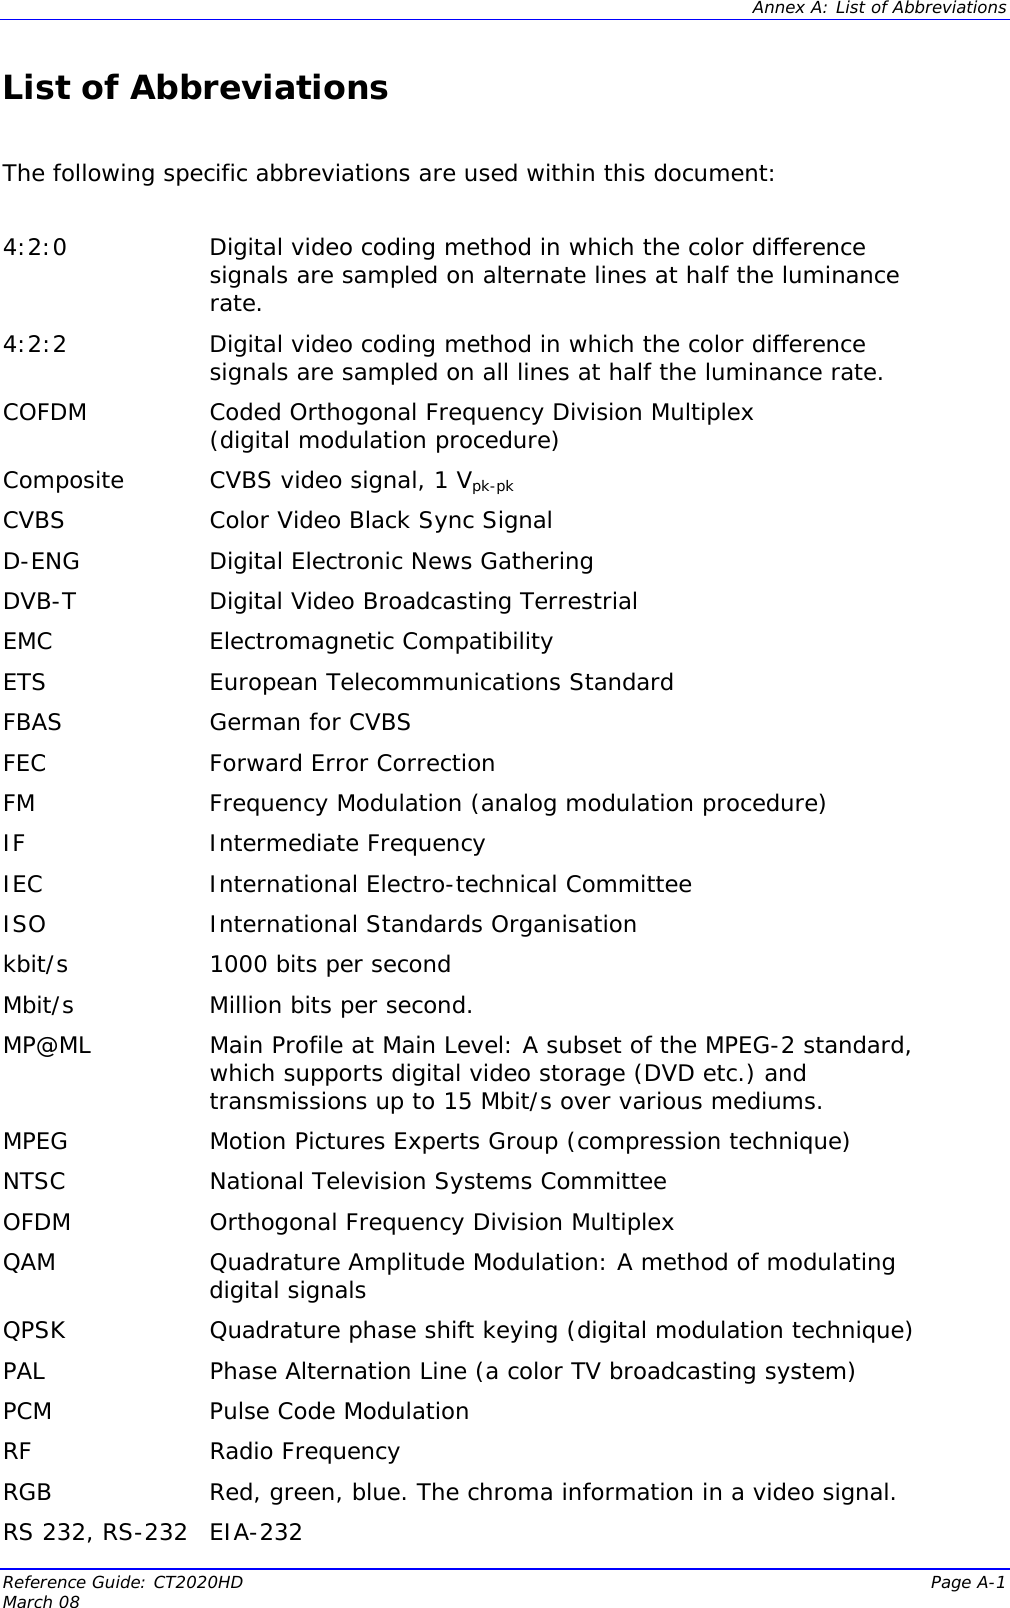  Annex A: List of Abbreviations Reference Guide: CT2020HD  Page A-1 March 08   List of Abbreviations  The following specific abbreviations are used within this document:   4:2:0  Digital video coding method in which the color difference signals are sampled on alternate lines at half the luminance rate. 4:2:2  Digital video coding method in which the color difference signals are sampled on all lines at half the luminance rate. COFDM  Coded Orthogonal Frequency Division Multiplex  (digital modulation procedure) Composite  CVBS video signal, 1 Vpk-pk CVBS  Color Video Black Sync Signal D-ENG  Digital Electronic News Gathering DVB-T  Digital Video Broadcasting Terrestrial EMC   Electromagnetic Compatibility ETS  European Telecommunications Standard FBAS German for CVBS FEC  Forward Error Correction FM Frequency Modulation (analog modulation procedure) IF Intermediate Frequency IEC International Electro-technical Committee ISO International Standards Organisation kbit/s   1000 bits per second Mbit/s  Million bits per second. MP@ML  Main Profile at Main Level: A subset of the MPEG-2 standard, which supports digital video storage (DVD etc.) and transmissions up to 15 Mbit/s over various mediums. MPEG  Motion Pictures Experts Group (compression technique)  NTSC  National Television Systems Committee OFDM   Orthogonal Frequency Division Multiplex QAM  Quadrature Amplitude Modulation: A method of modulating digital signals QPSK  Quadrature phase shift keying (digital modulation technique) PAL  Phase Alternation Line (a color TV broadcasting system) PCM  Pulse Code Modulation RF Radio Frequency RGB  Red, green, blue. The chroma information in a video signal. RS 232, RS-232 EIA-232 